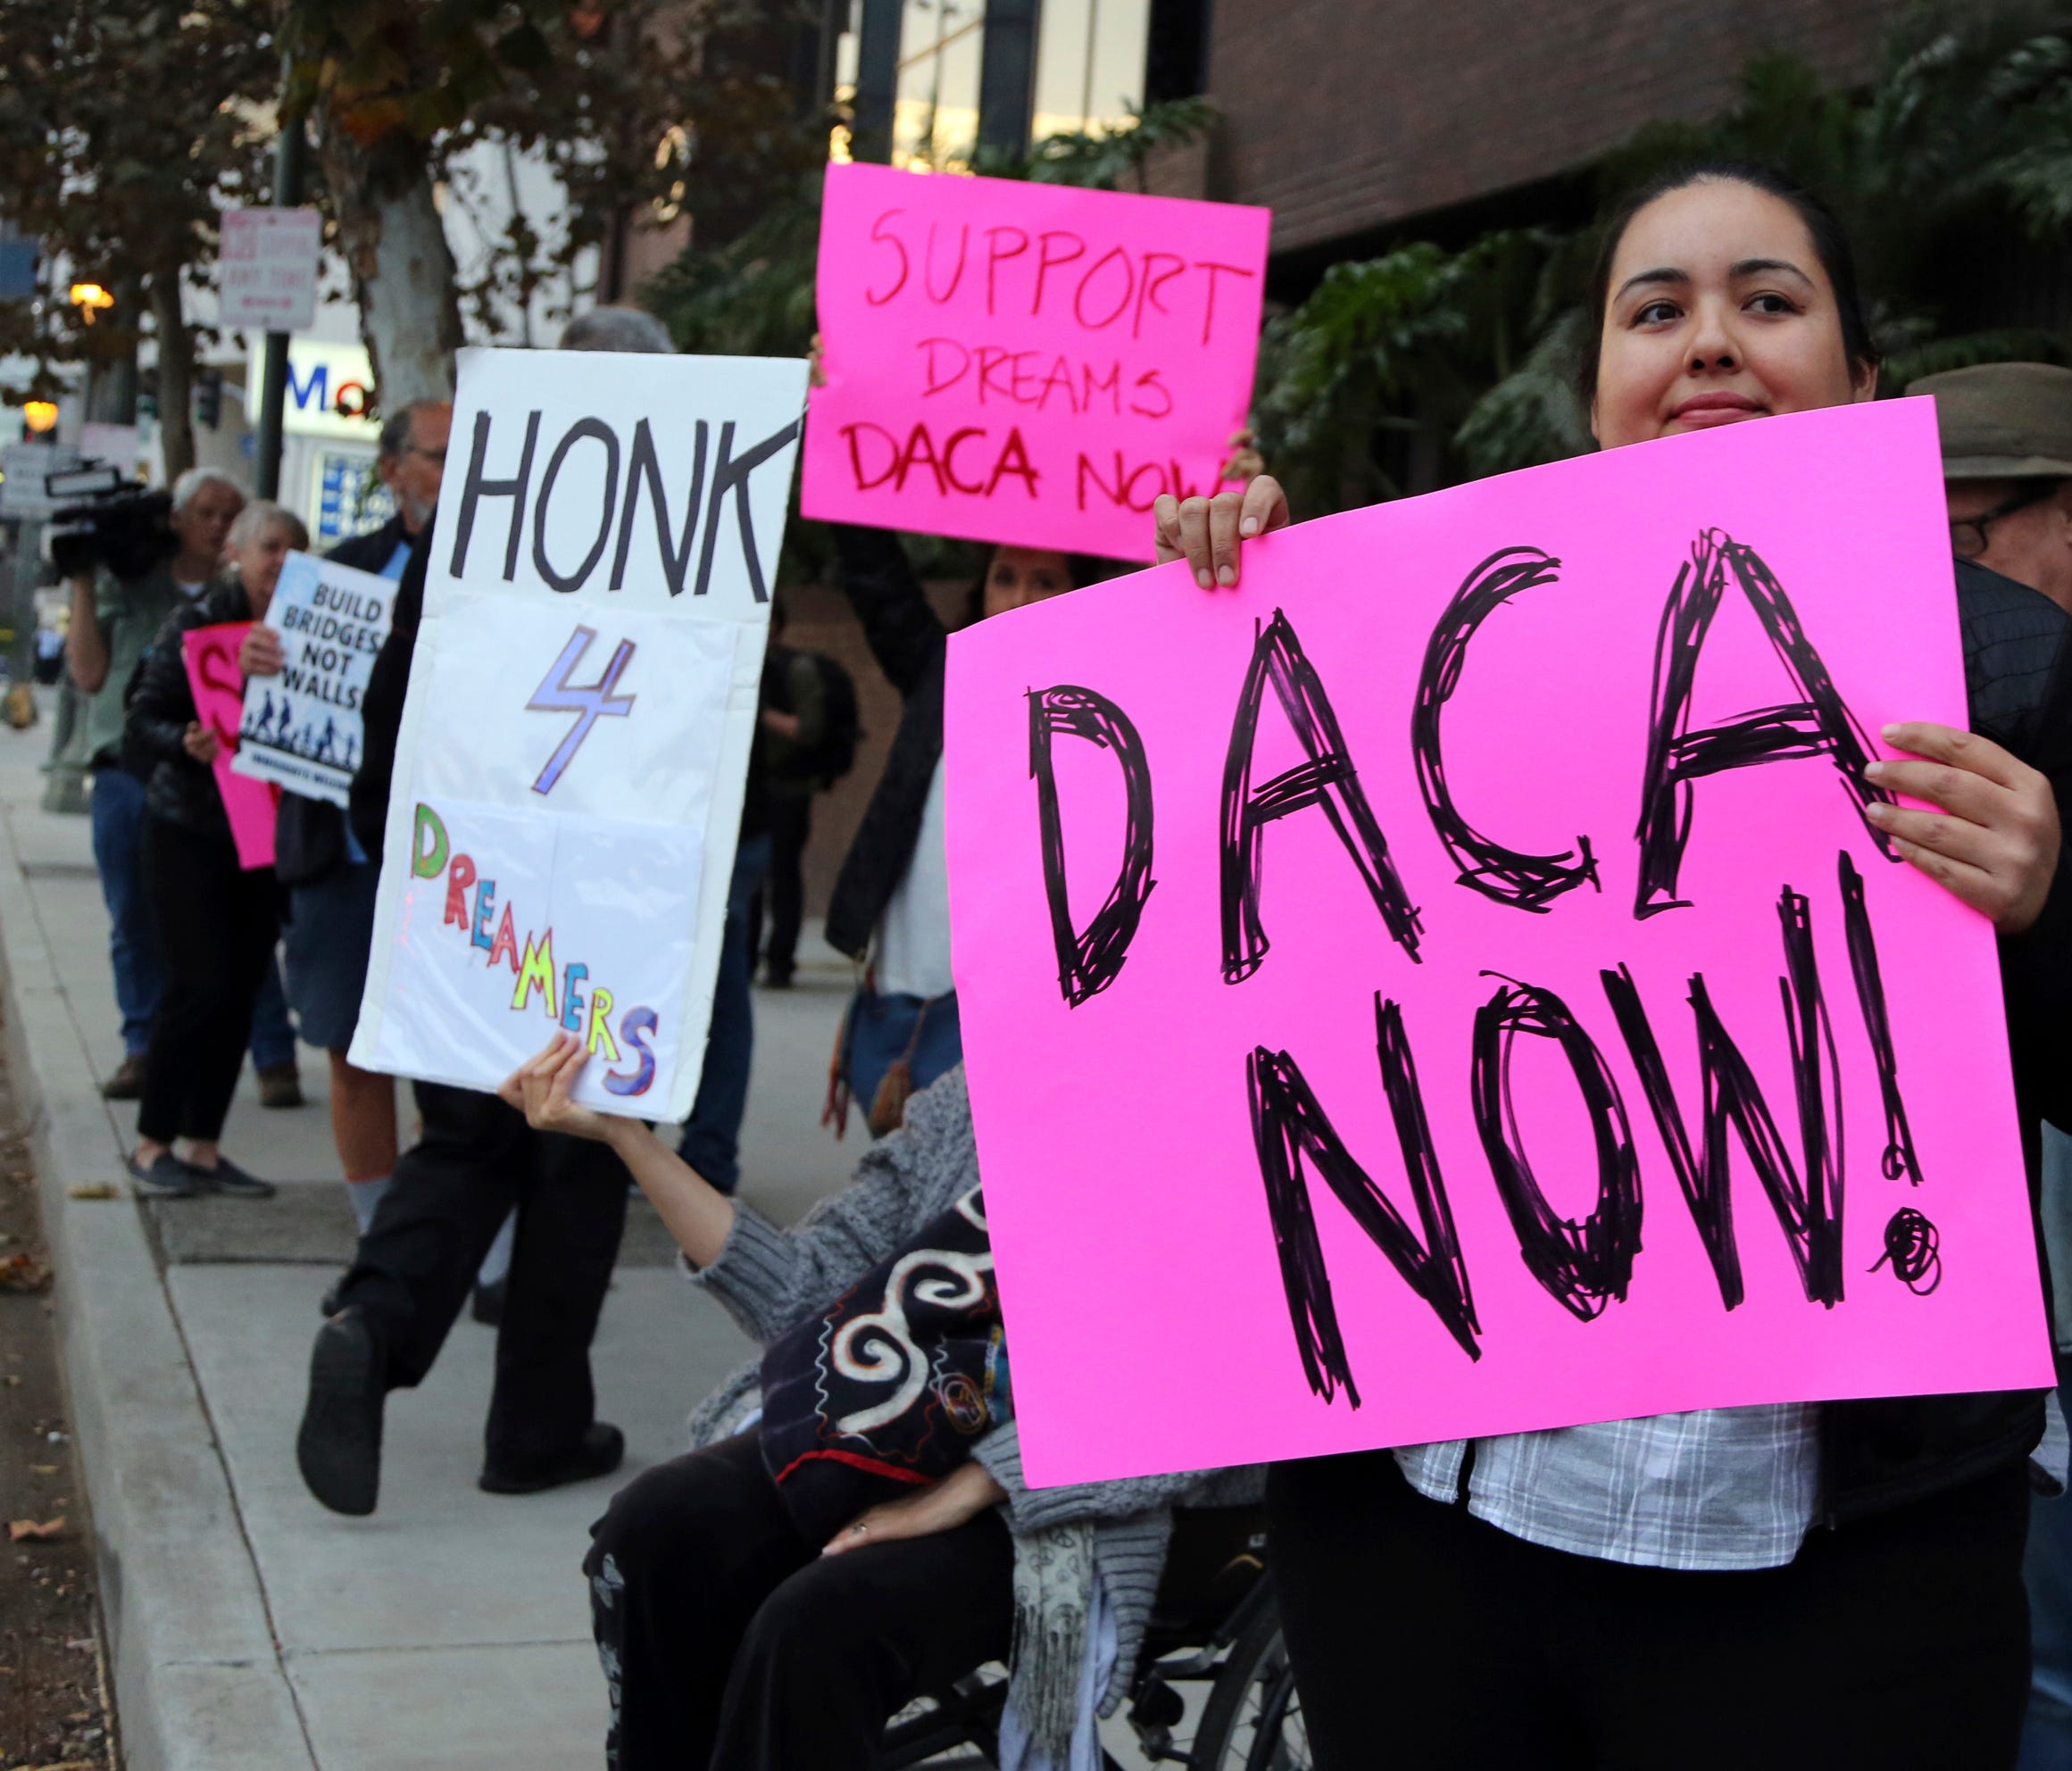 Demonstrators urge to protect the Deferred Action for Childhood Arrivals (DACA) program rally outside the office of Sen. Dianne Feinstein in Los Angeles.